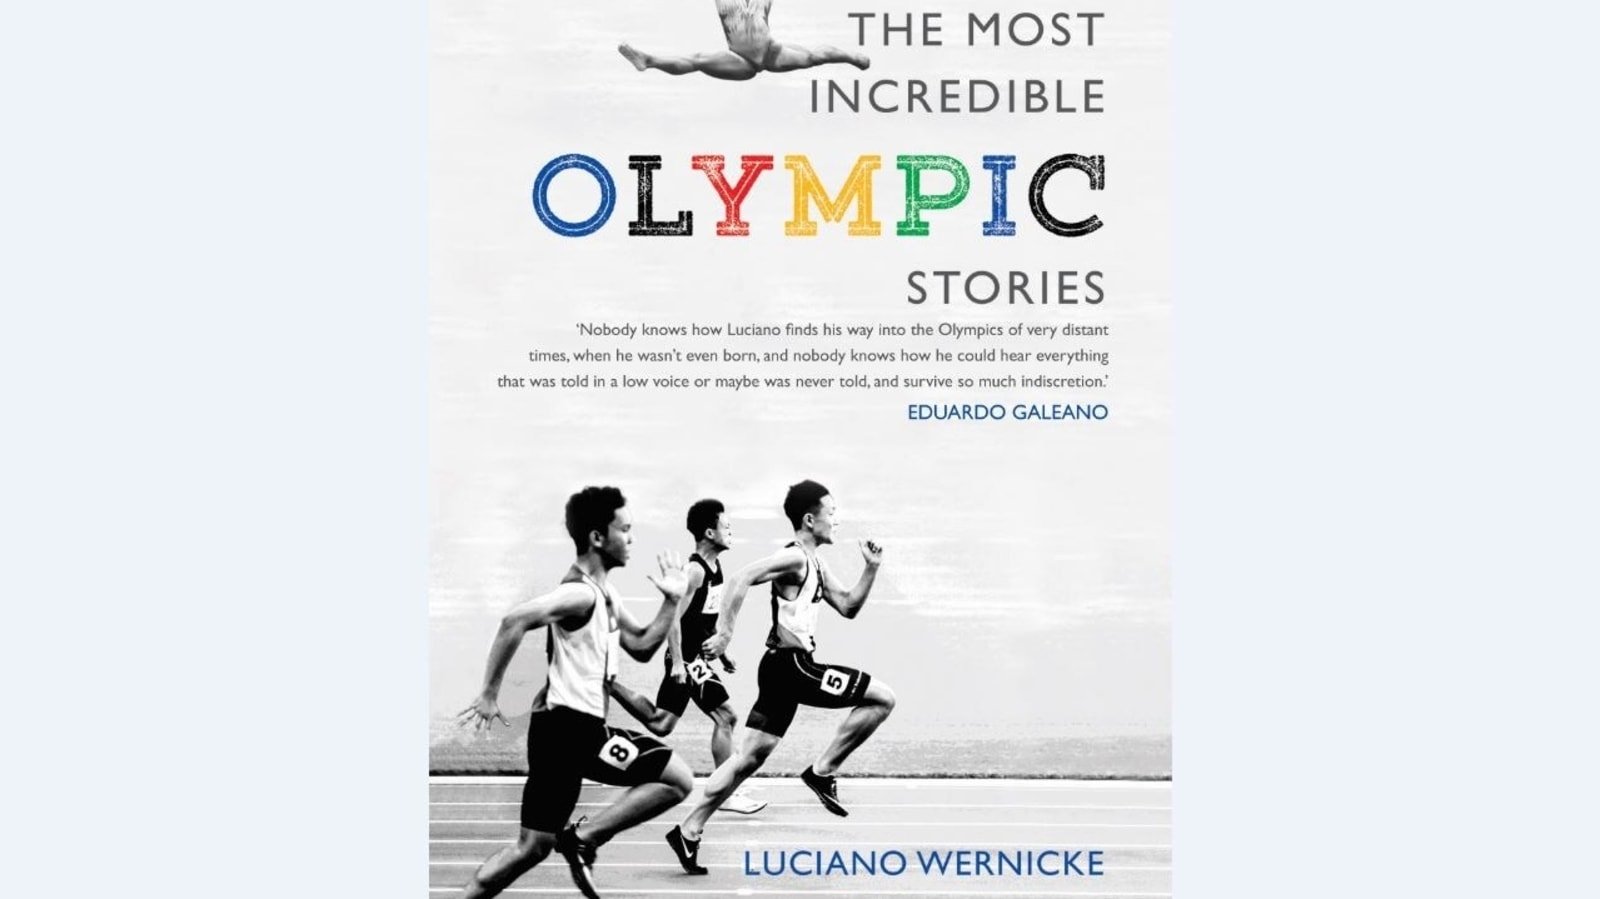 A book on some of the most fascinating stories from the Olympics